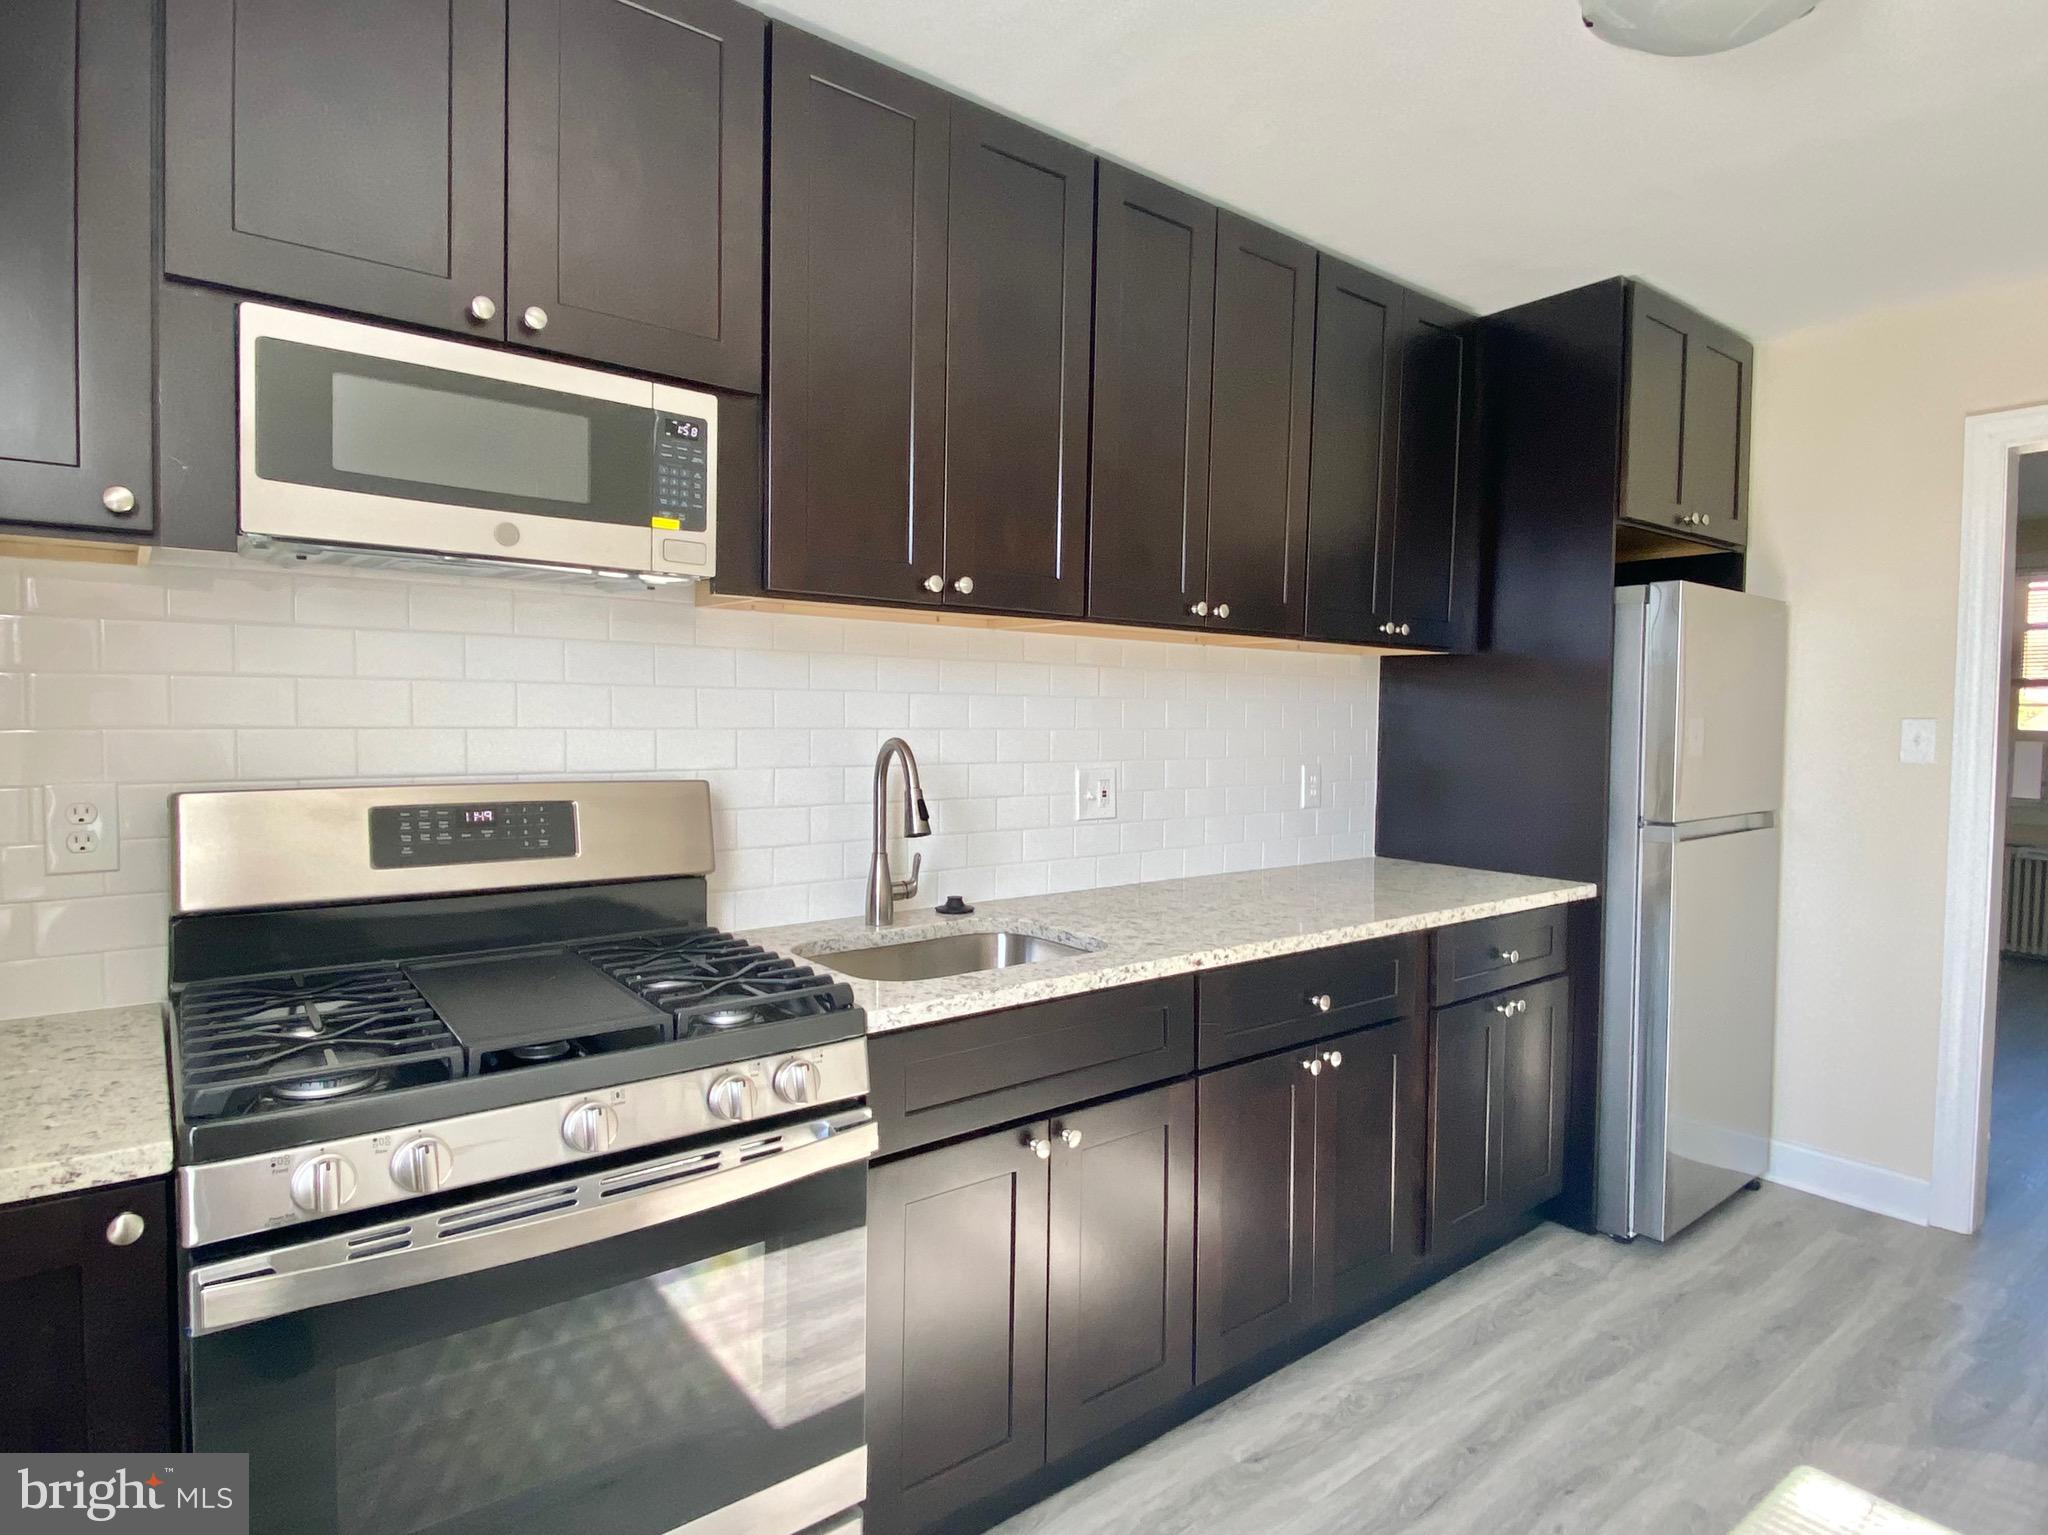 a kitchen with stainless steel appliances wooden cabinets and a stove top oven